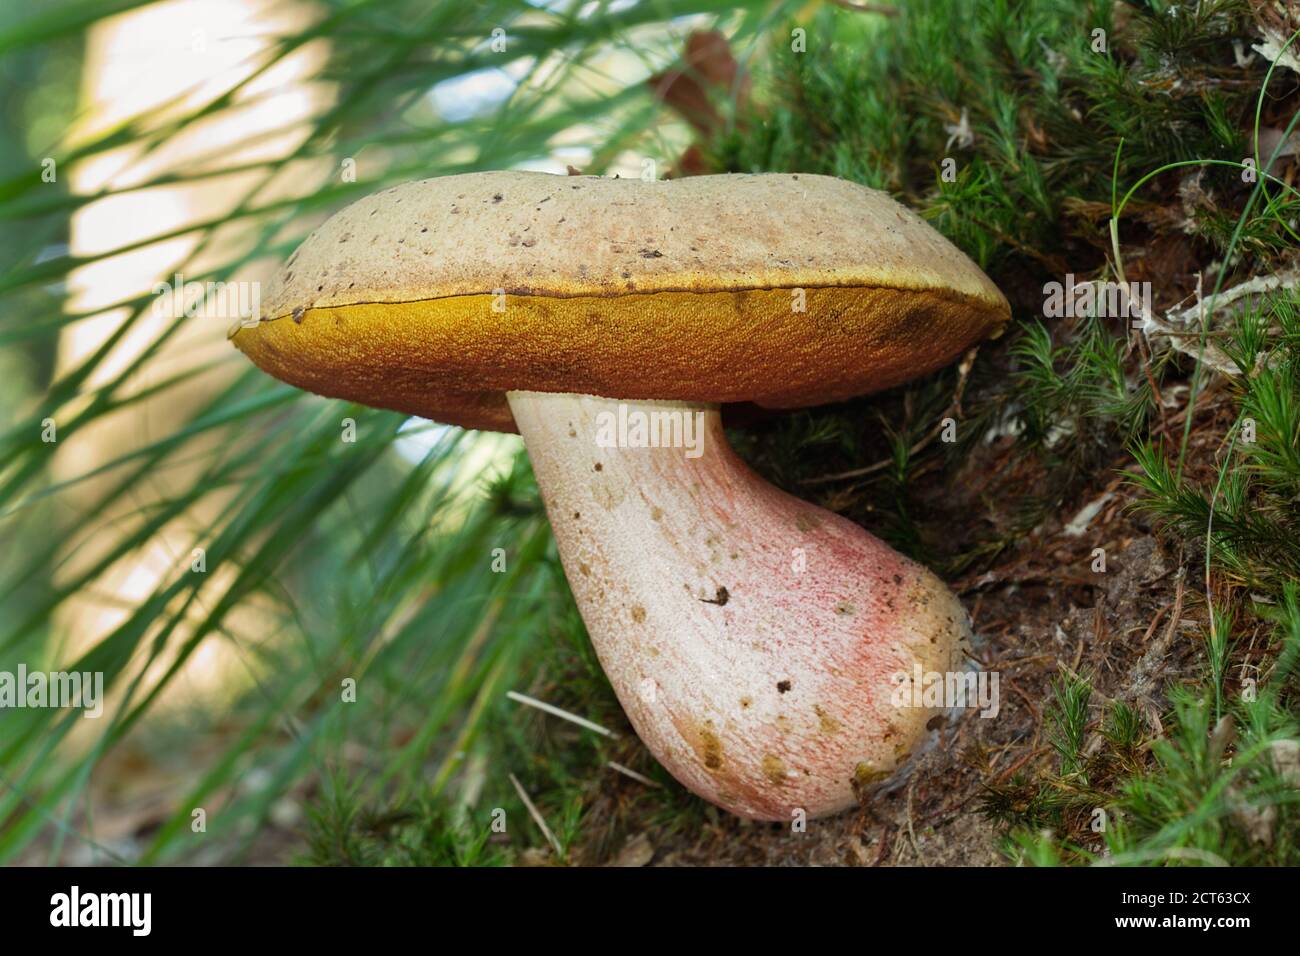 Red foot bolete, also known as Scarletina bolete, growing in a forest Stock Photo